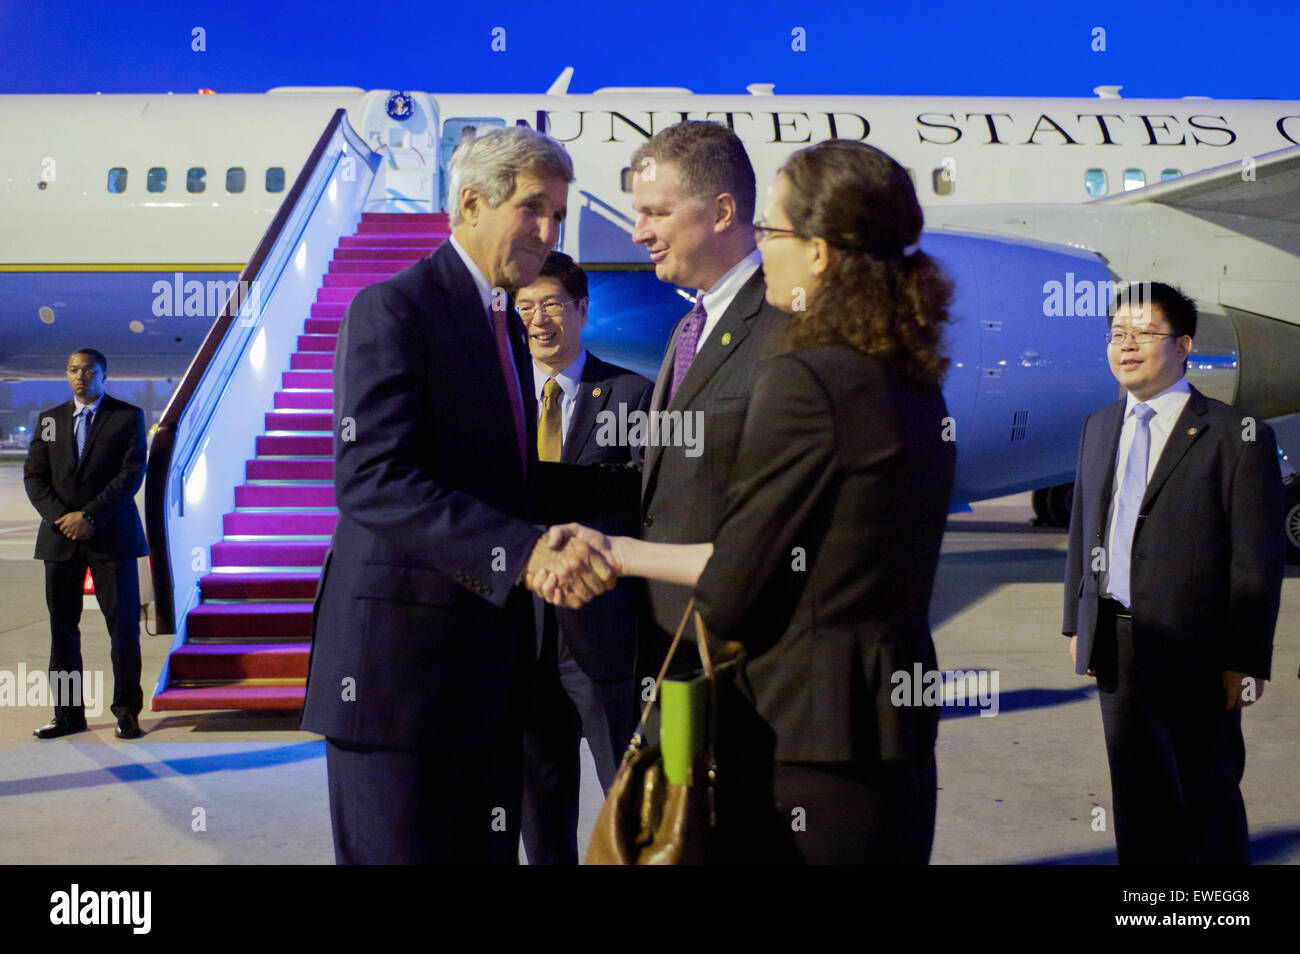 U.S. Secretary of State John Kerry shakes hands with Acting U.S. Embassy Beijing Deputy Chief of Mission Kaye Lee while being introduced by Charge d'Affaires Dan Kritenbrink after stepping off his plane in Beijing, China, in the pre-dawn hours of May 16, 2015, for meetings with President Xi Jinping, Premier Li Keqiang, Foreign Minister Wang Yi, State Councilor Yang Jiechi, Vice Chair Of Central Military Commission Fan Changlong, and other government leaders. Stock Photo